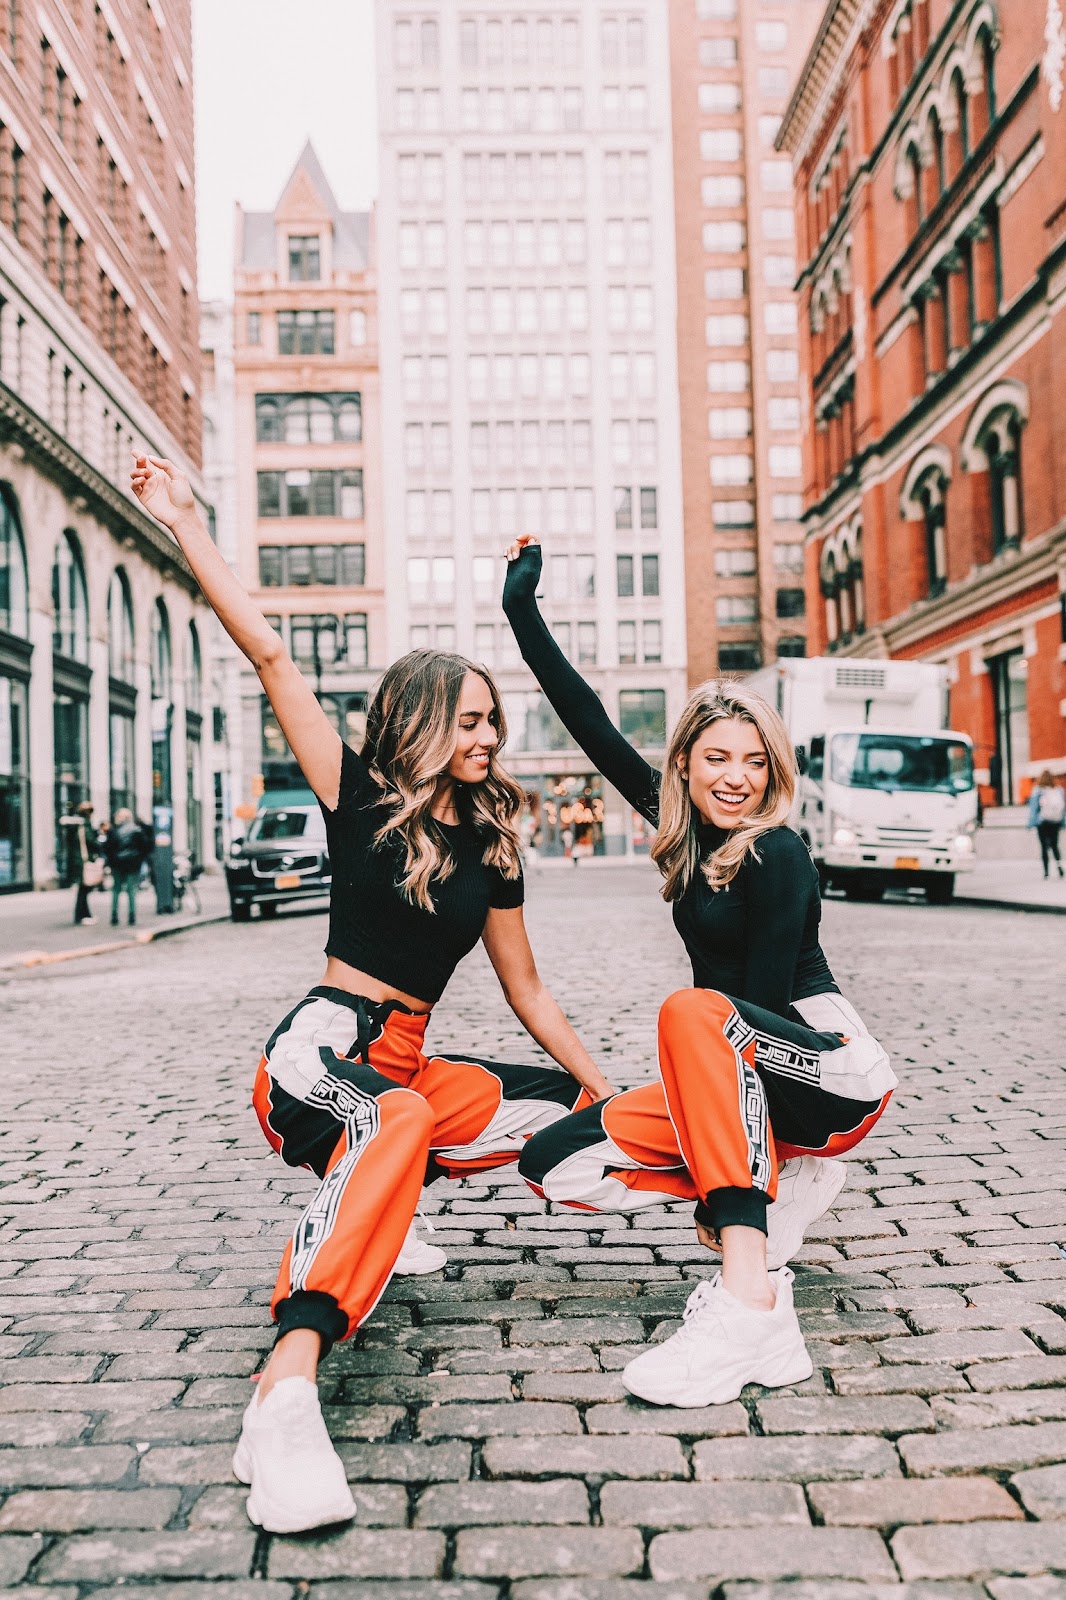 Elizabeth and Dale from @SweatsandtheCity in New York City